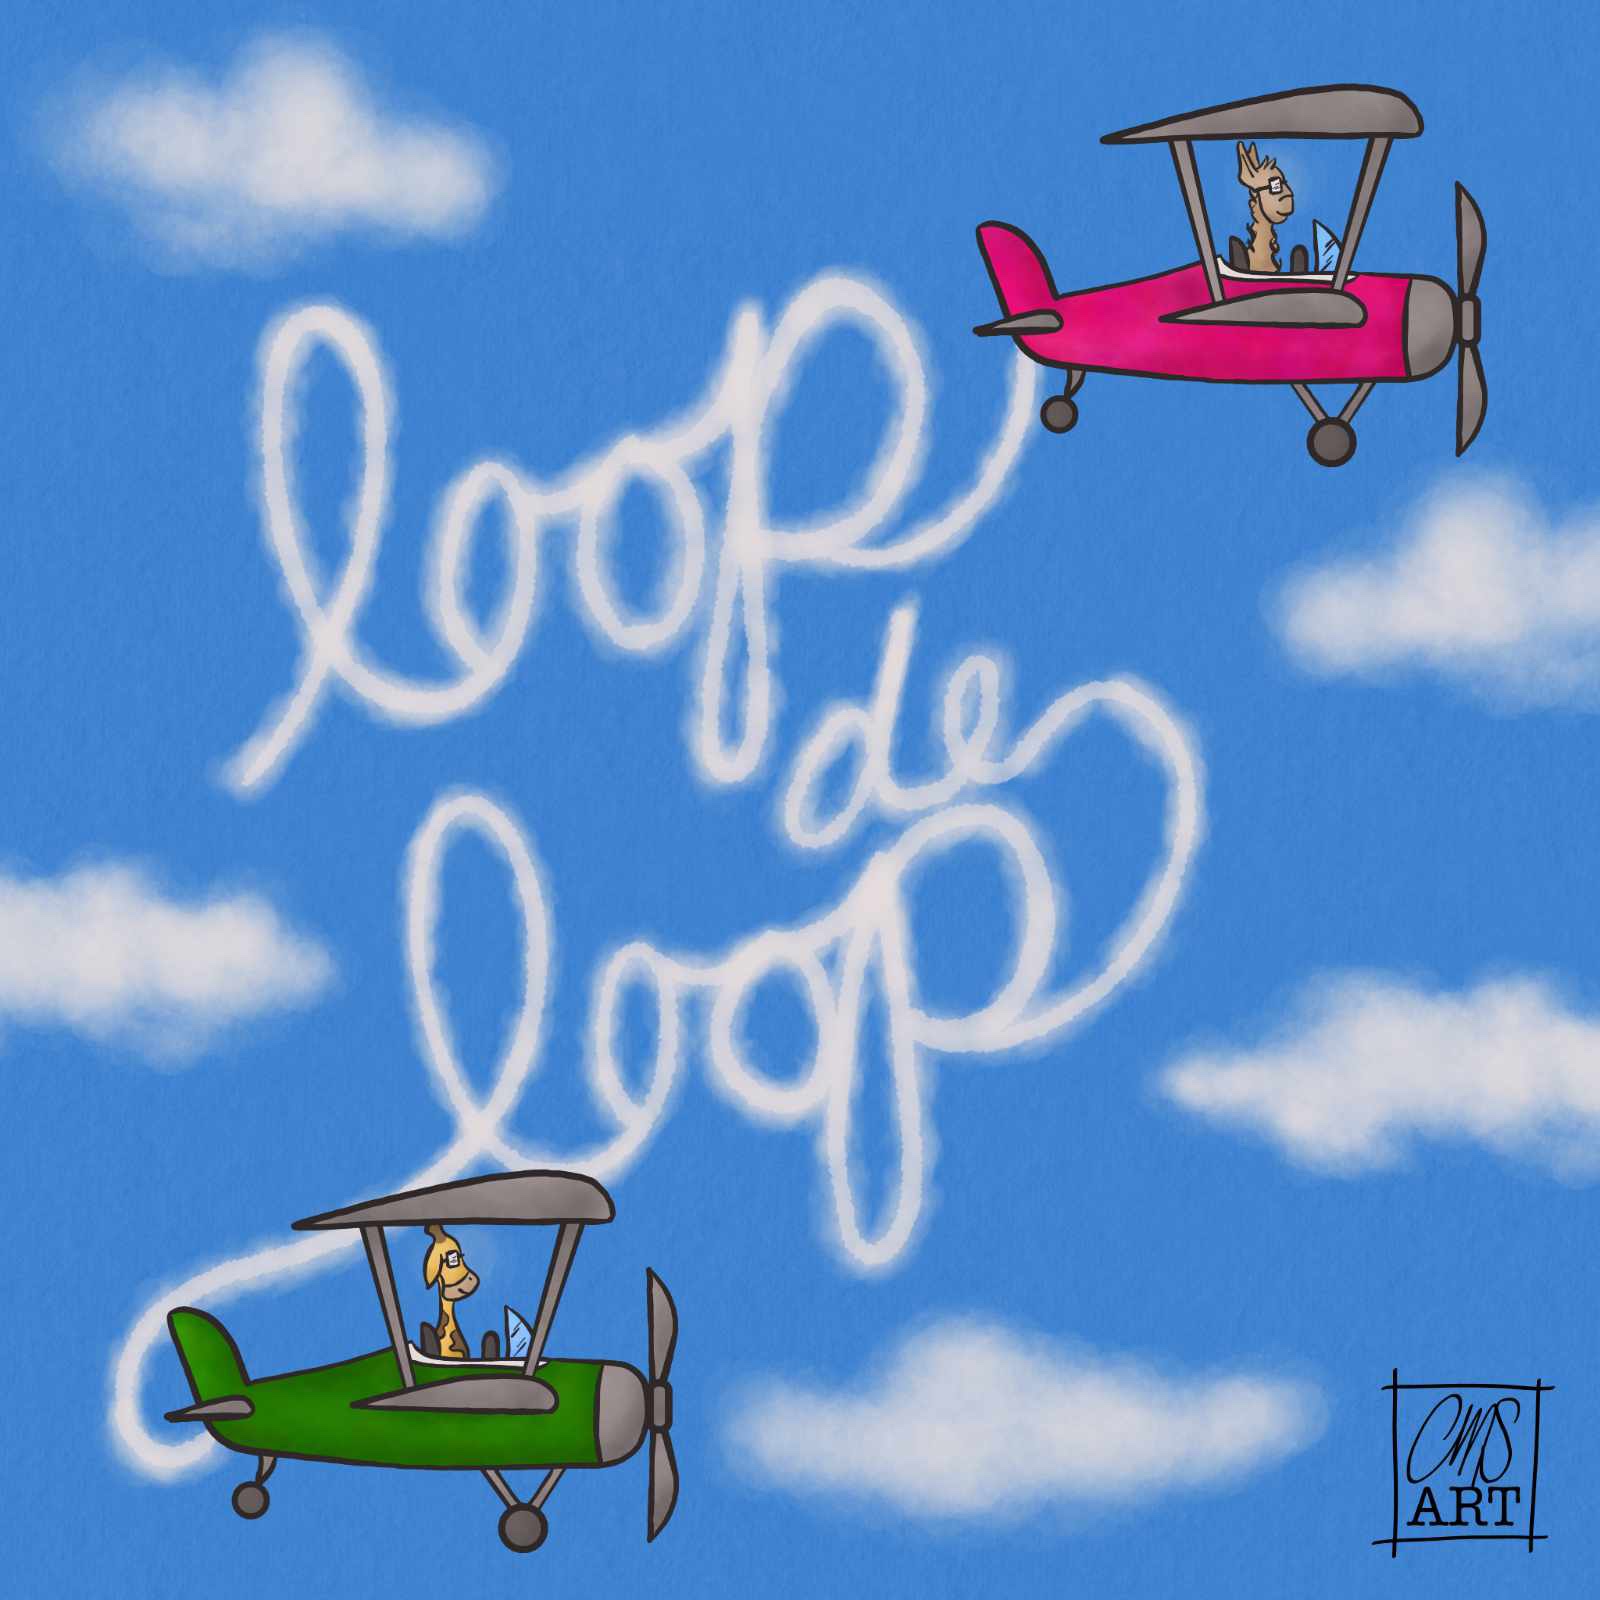 Lulu the Llama (pink prop plane) and Gigi the Giraffe (green prop plane) are sky writing Loop de Loop on a clear blue day with clouds in the sky.